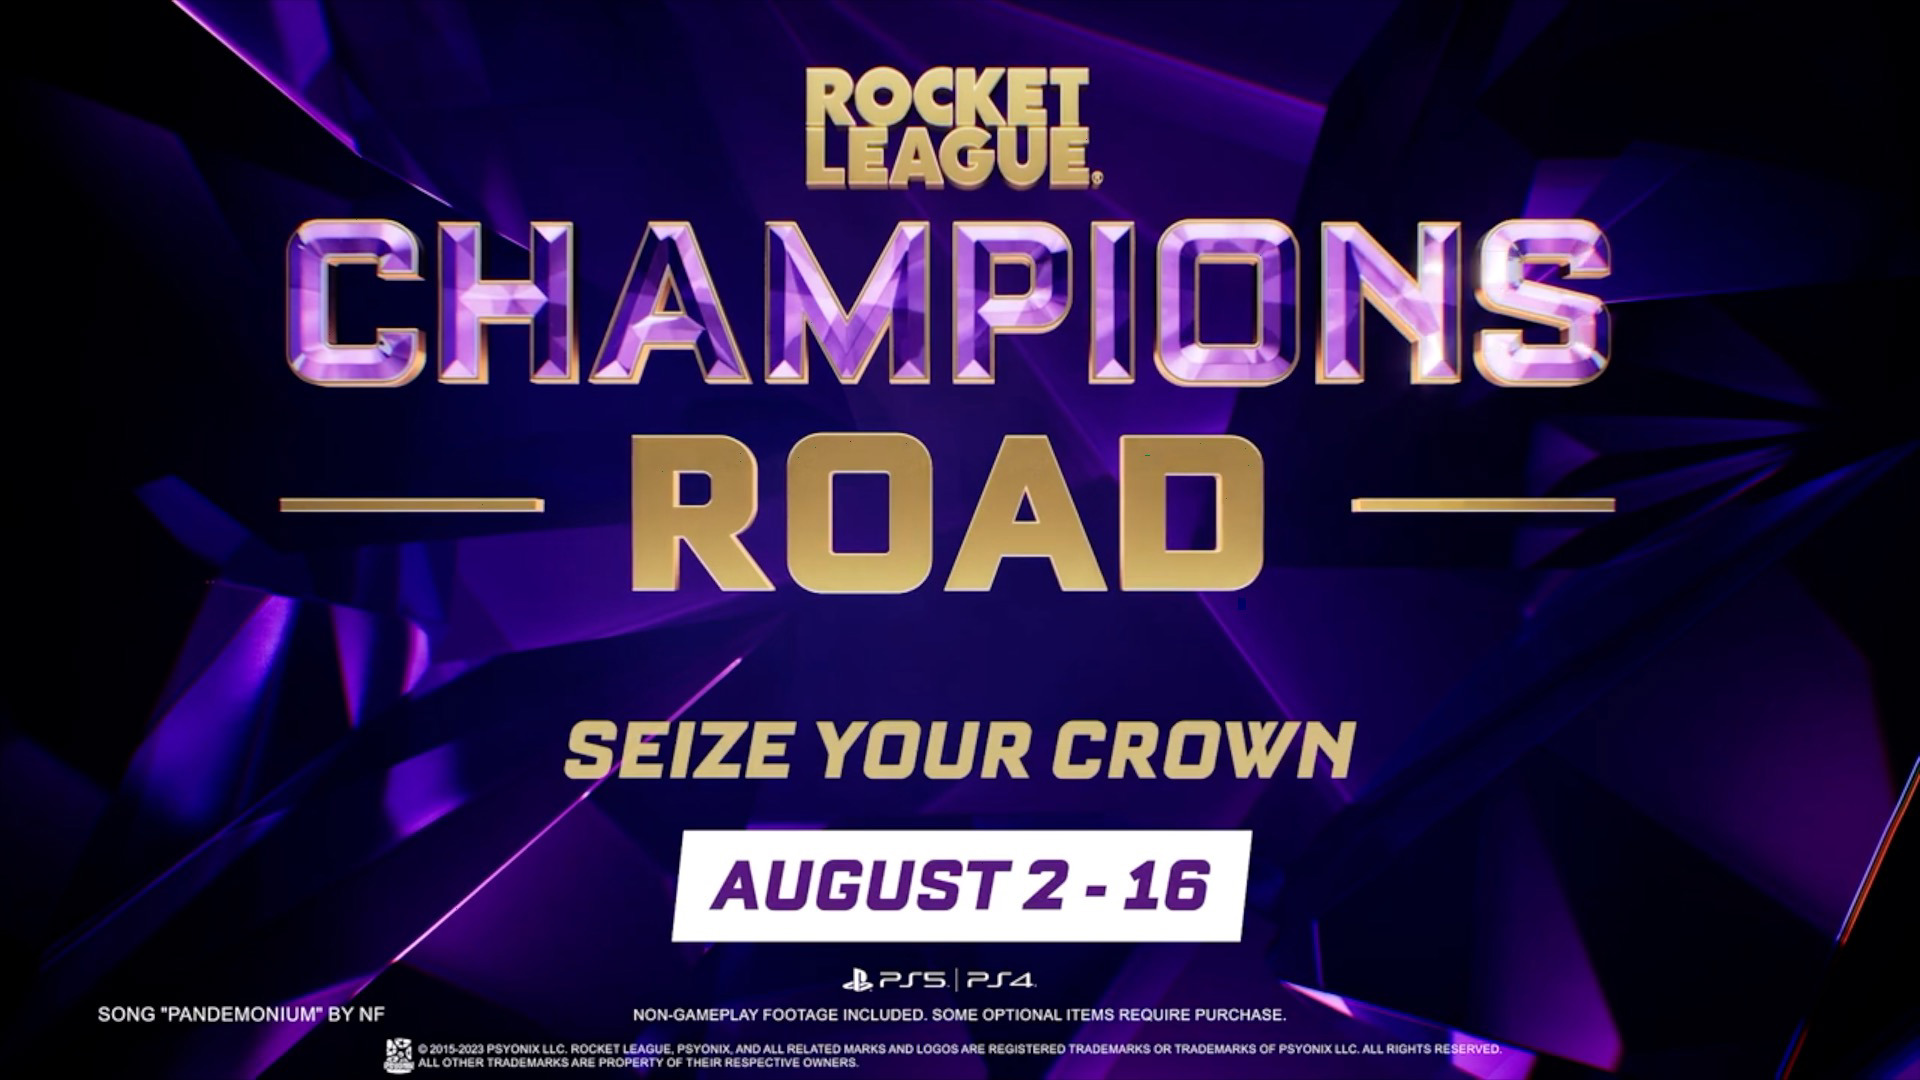 Seize the Crown With Champions Road